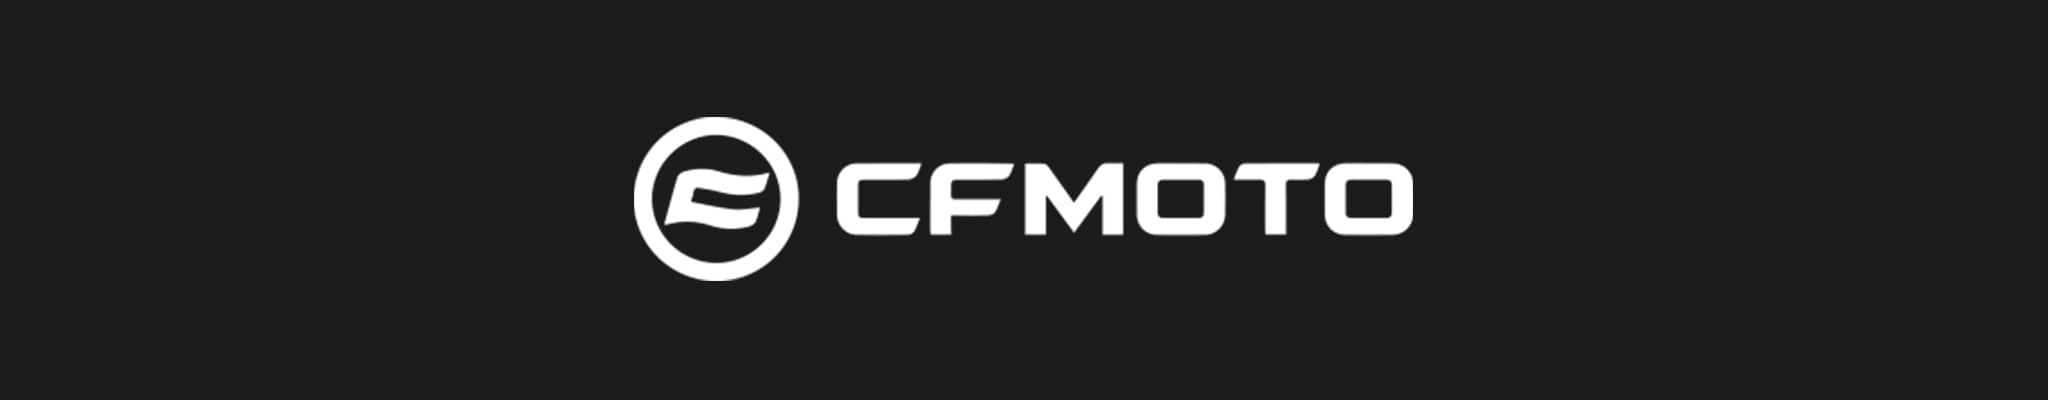 The CFMoto logo in white on a black background, featured alongside the text on the Perfex website.